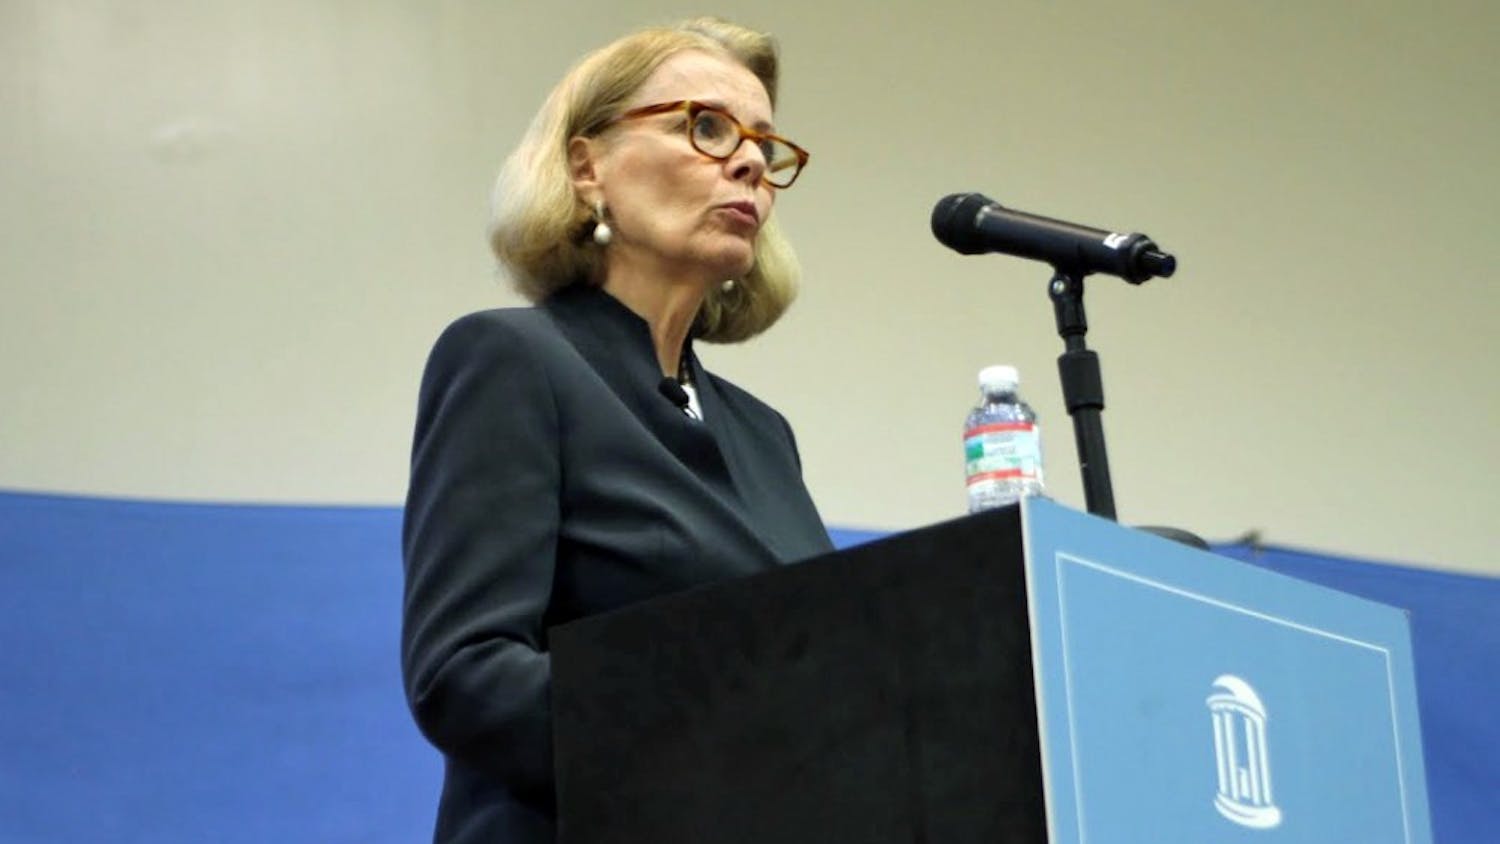 Peggy Noonan, celebrated author and Wall Street Journal columnist, spoke at the 2015 Park Lecture in Carroll Hall on Thursday.